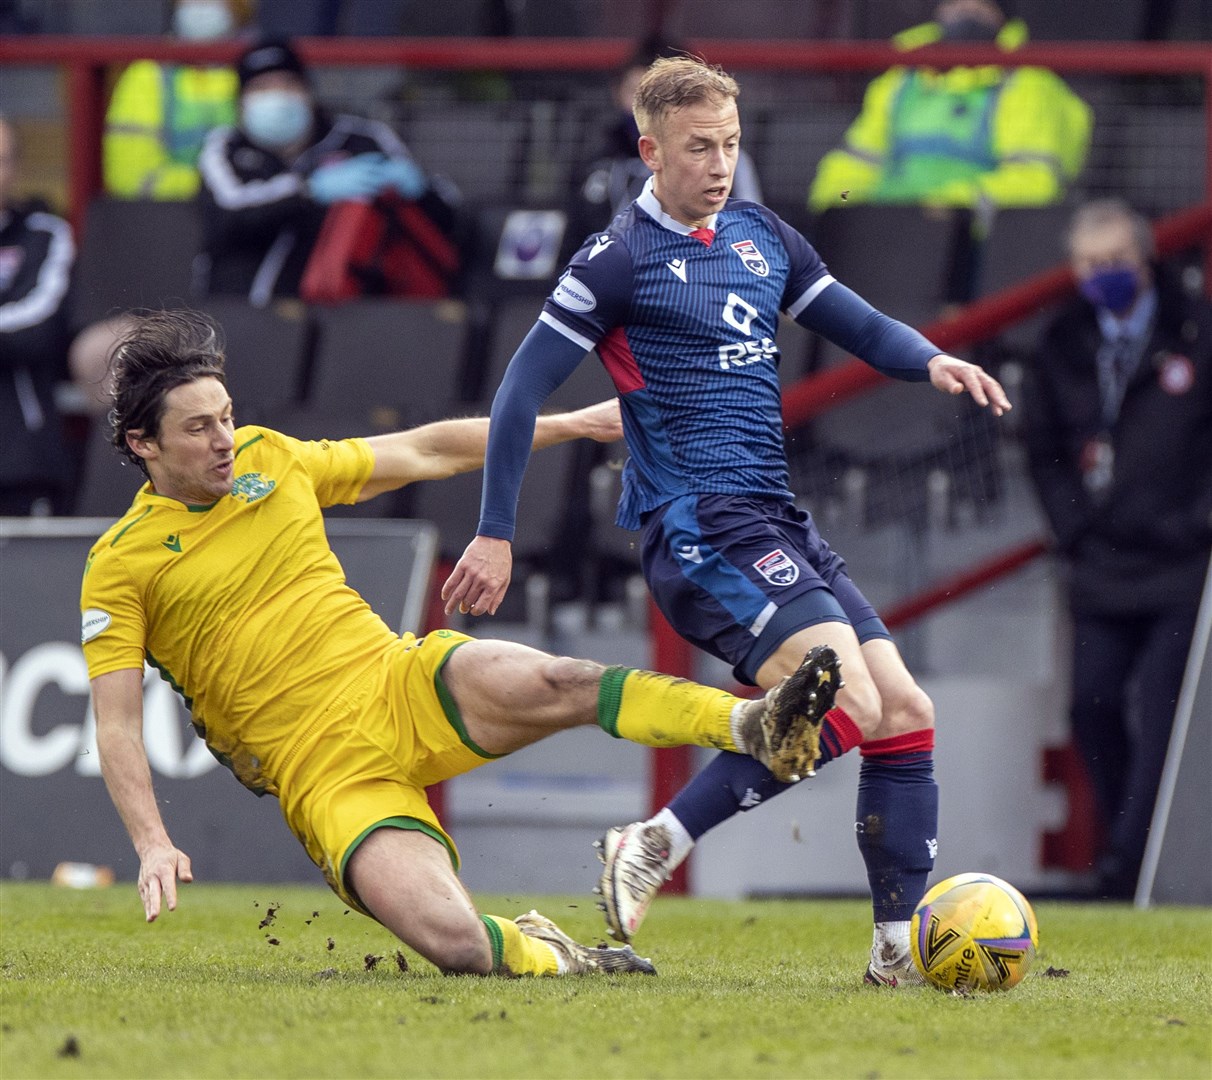 Harry Paton's brother Ben joins up at Ross County.